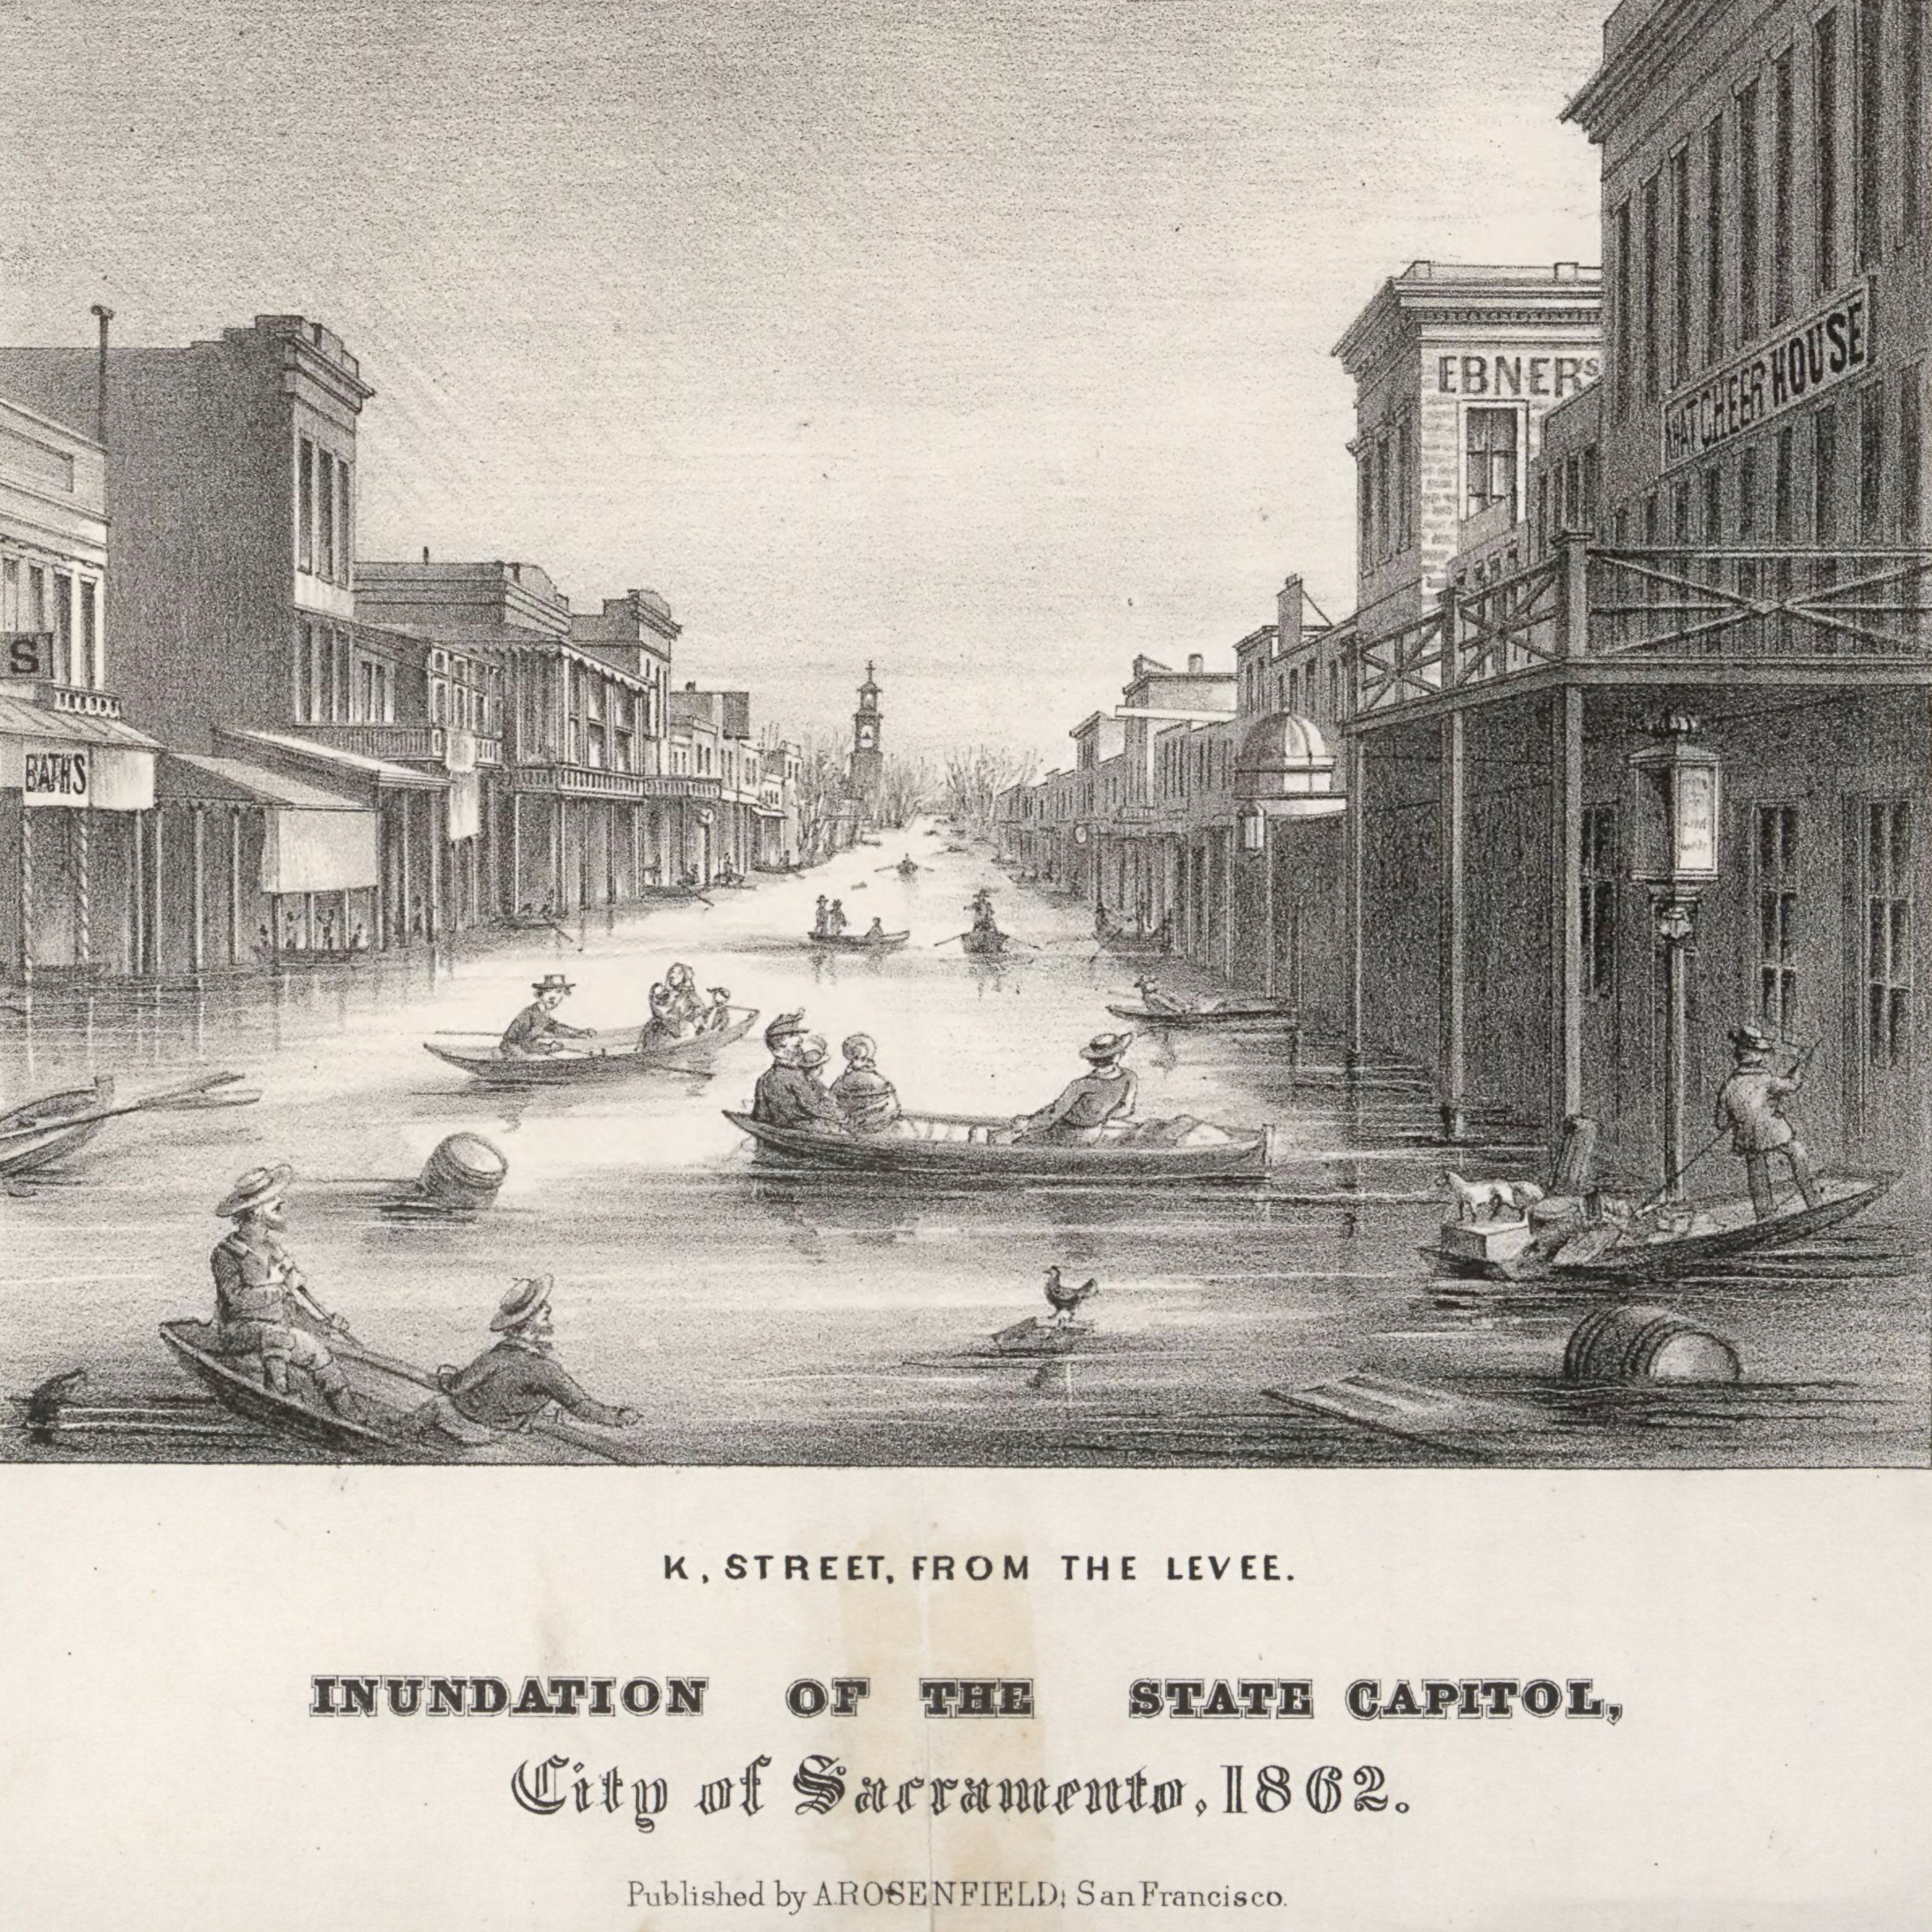 Grayscale lithograph of K Street flooding in Sacramento 1862